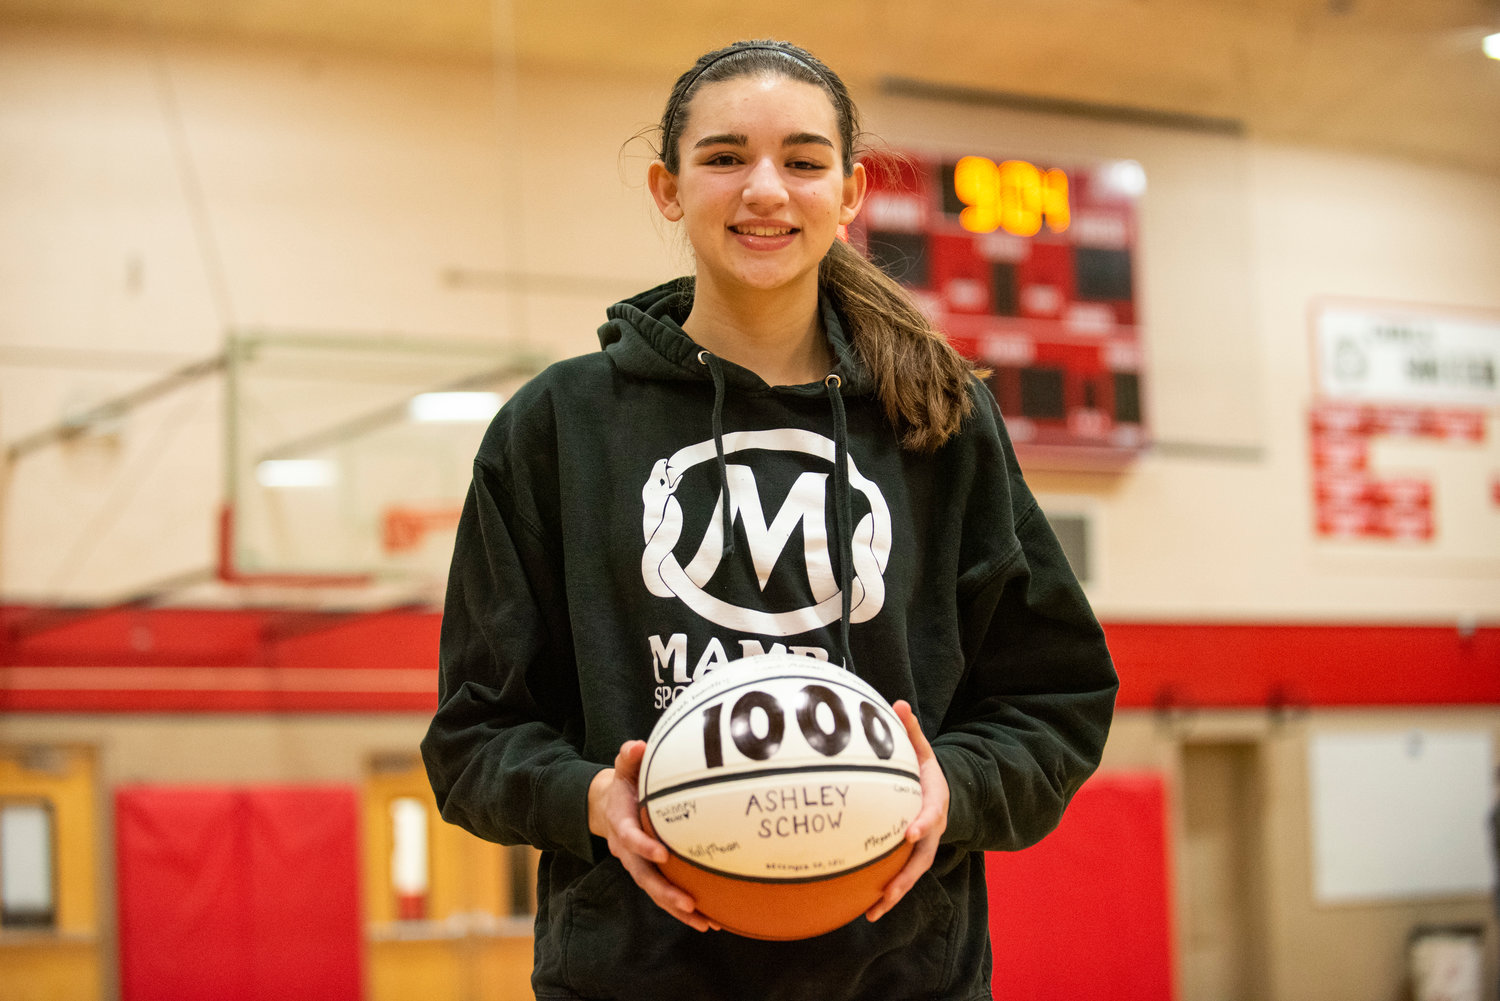 Tenino's Ashley Schow poses with her 1,000th-point ball after a home game against Cascade Christian on Dec. 20, 2021.